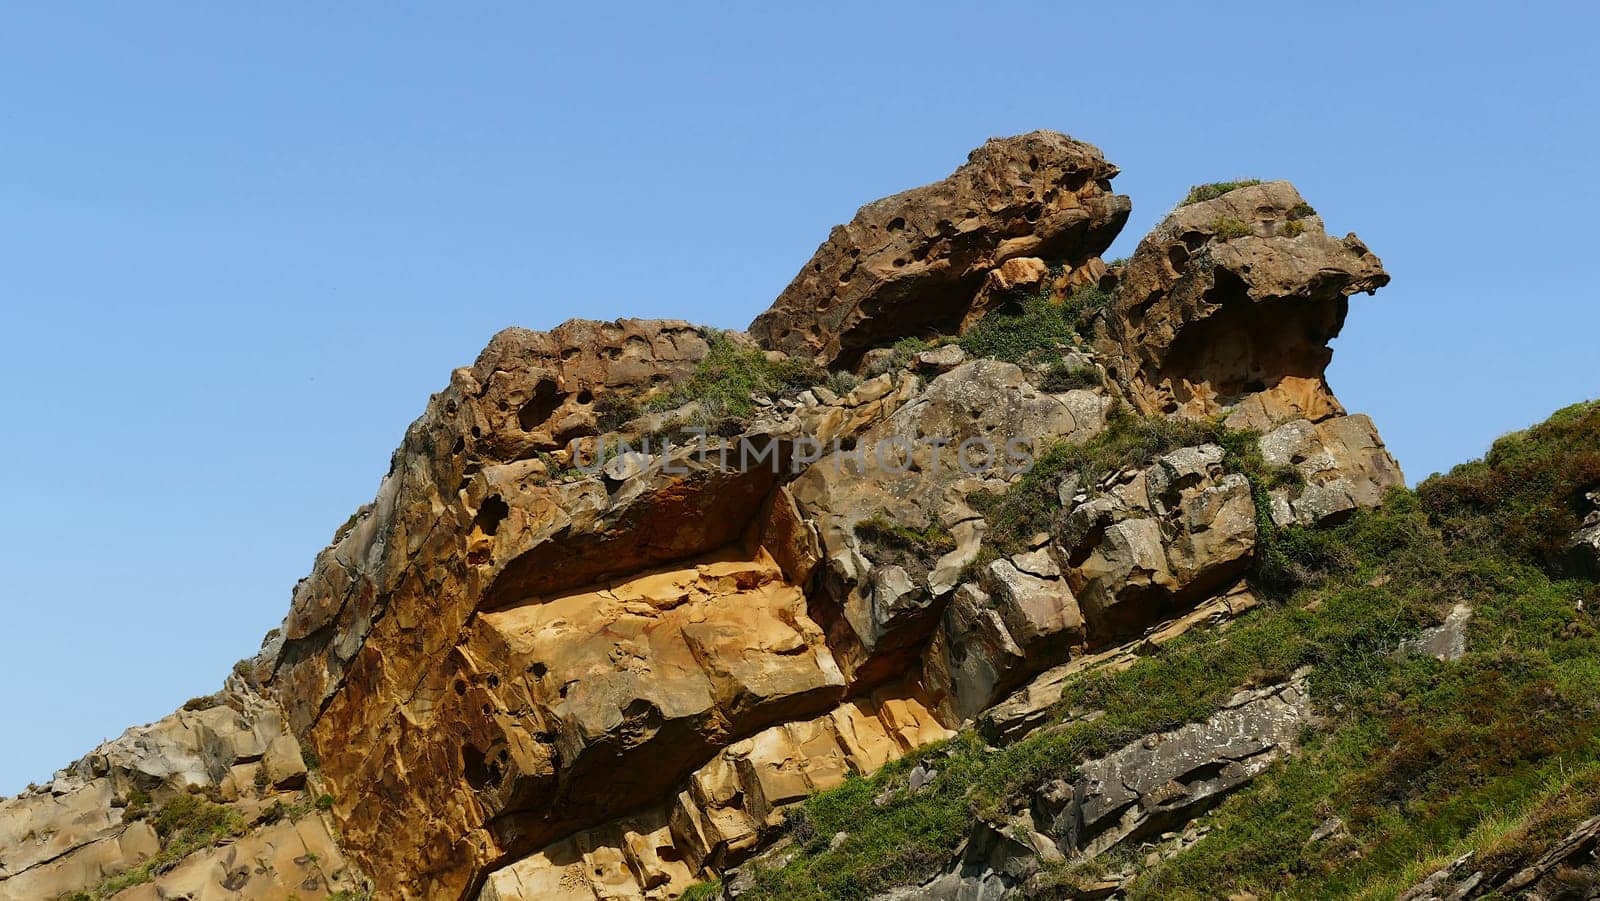 Cantabrian Sea coast in the Basque Country. Erosion on the rocks of Mount Jaizkibel.